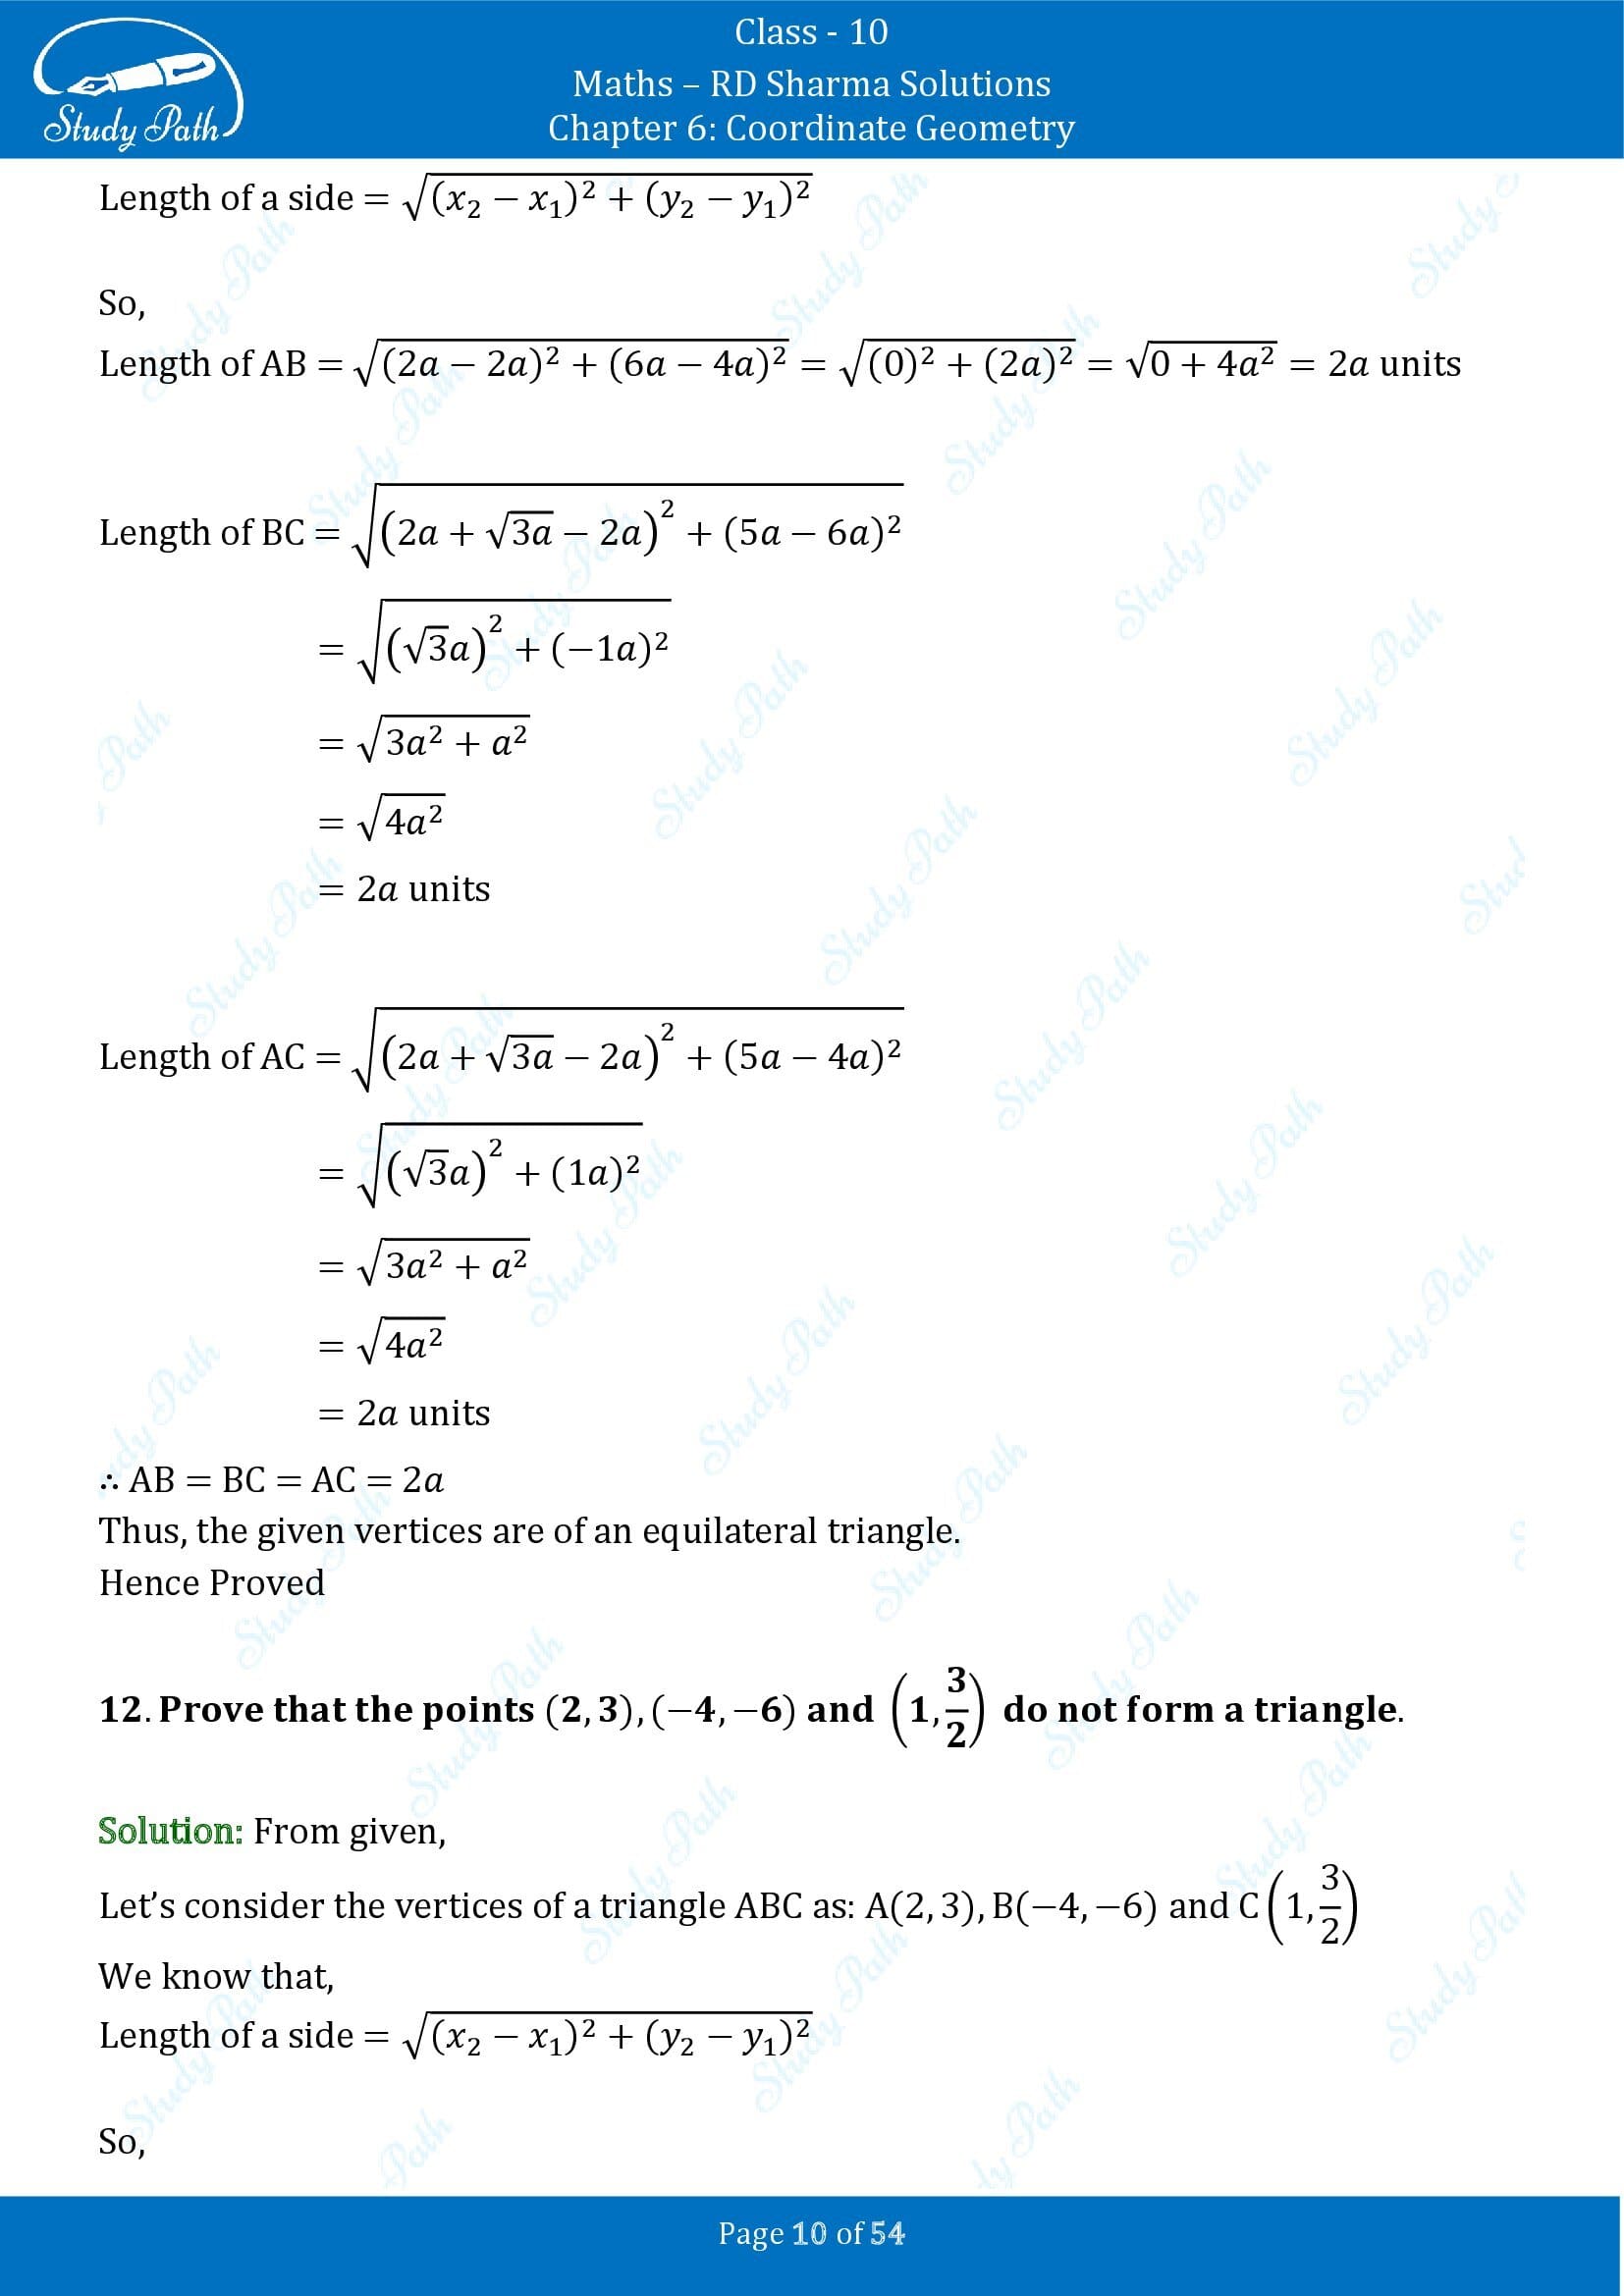 RD Sharma Solutions Class 10 Chapter 6 Coordinate Geometry Exercise 6.2 0010